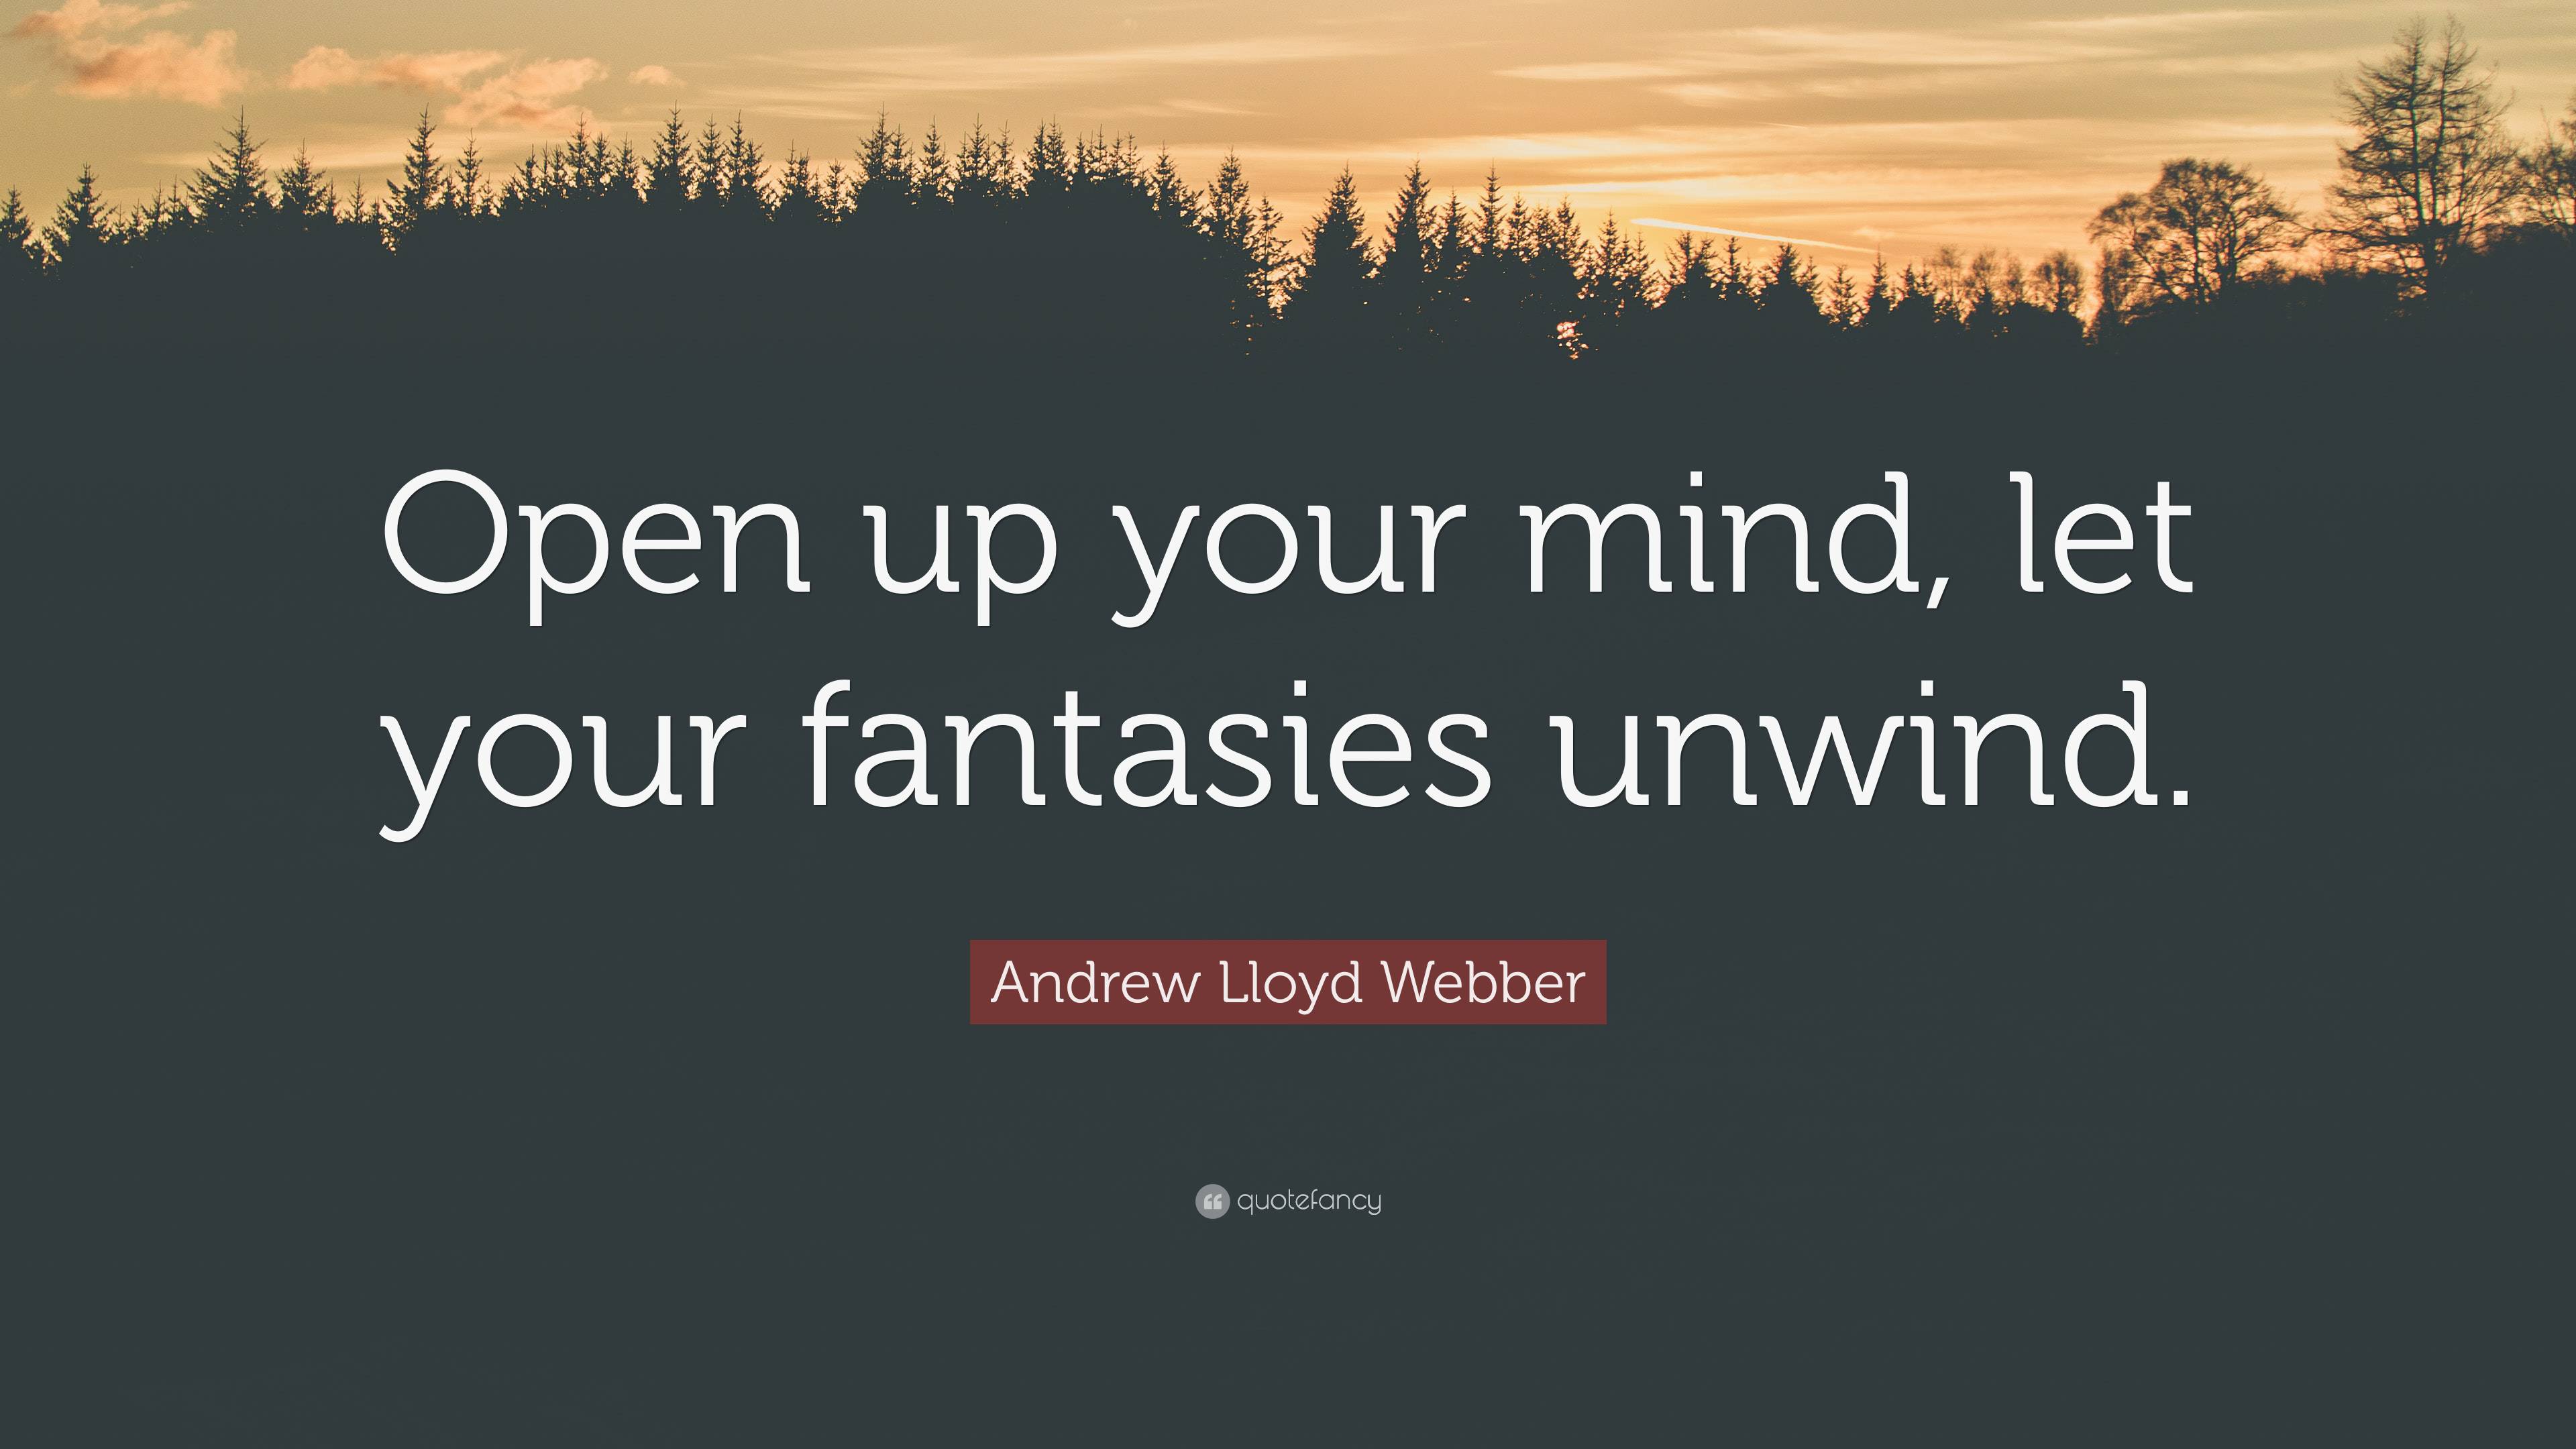 Andrew Lloyd Webber Quote: “Open up your mind